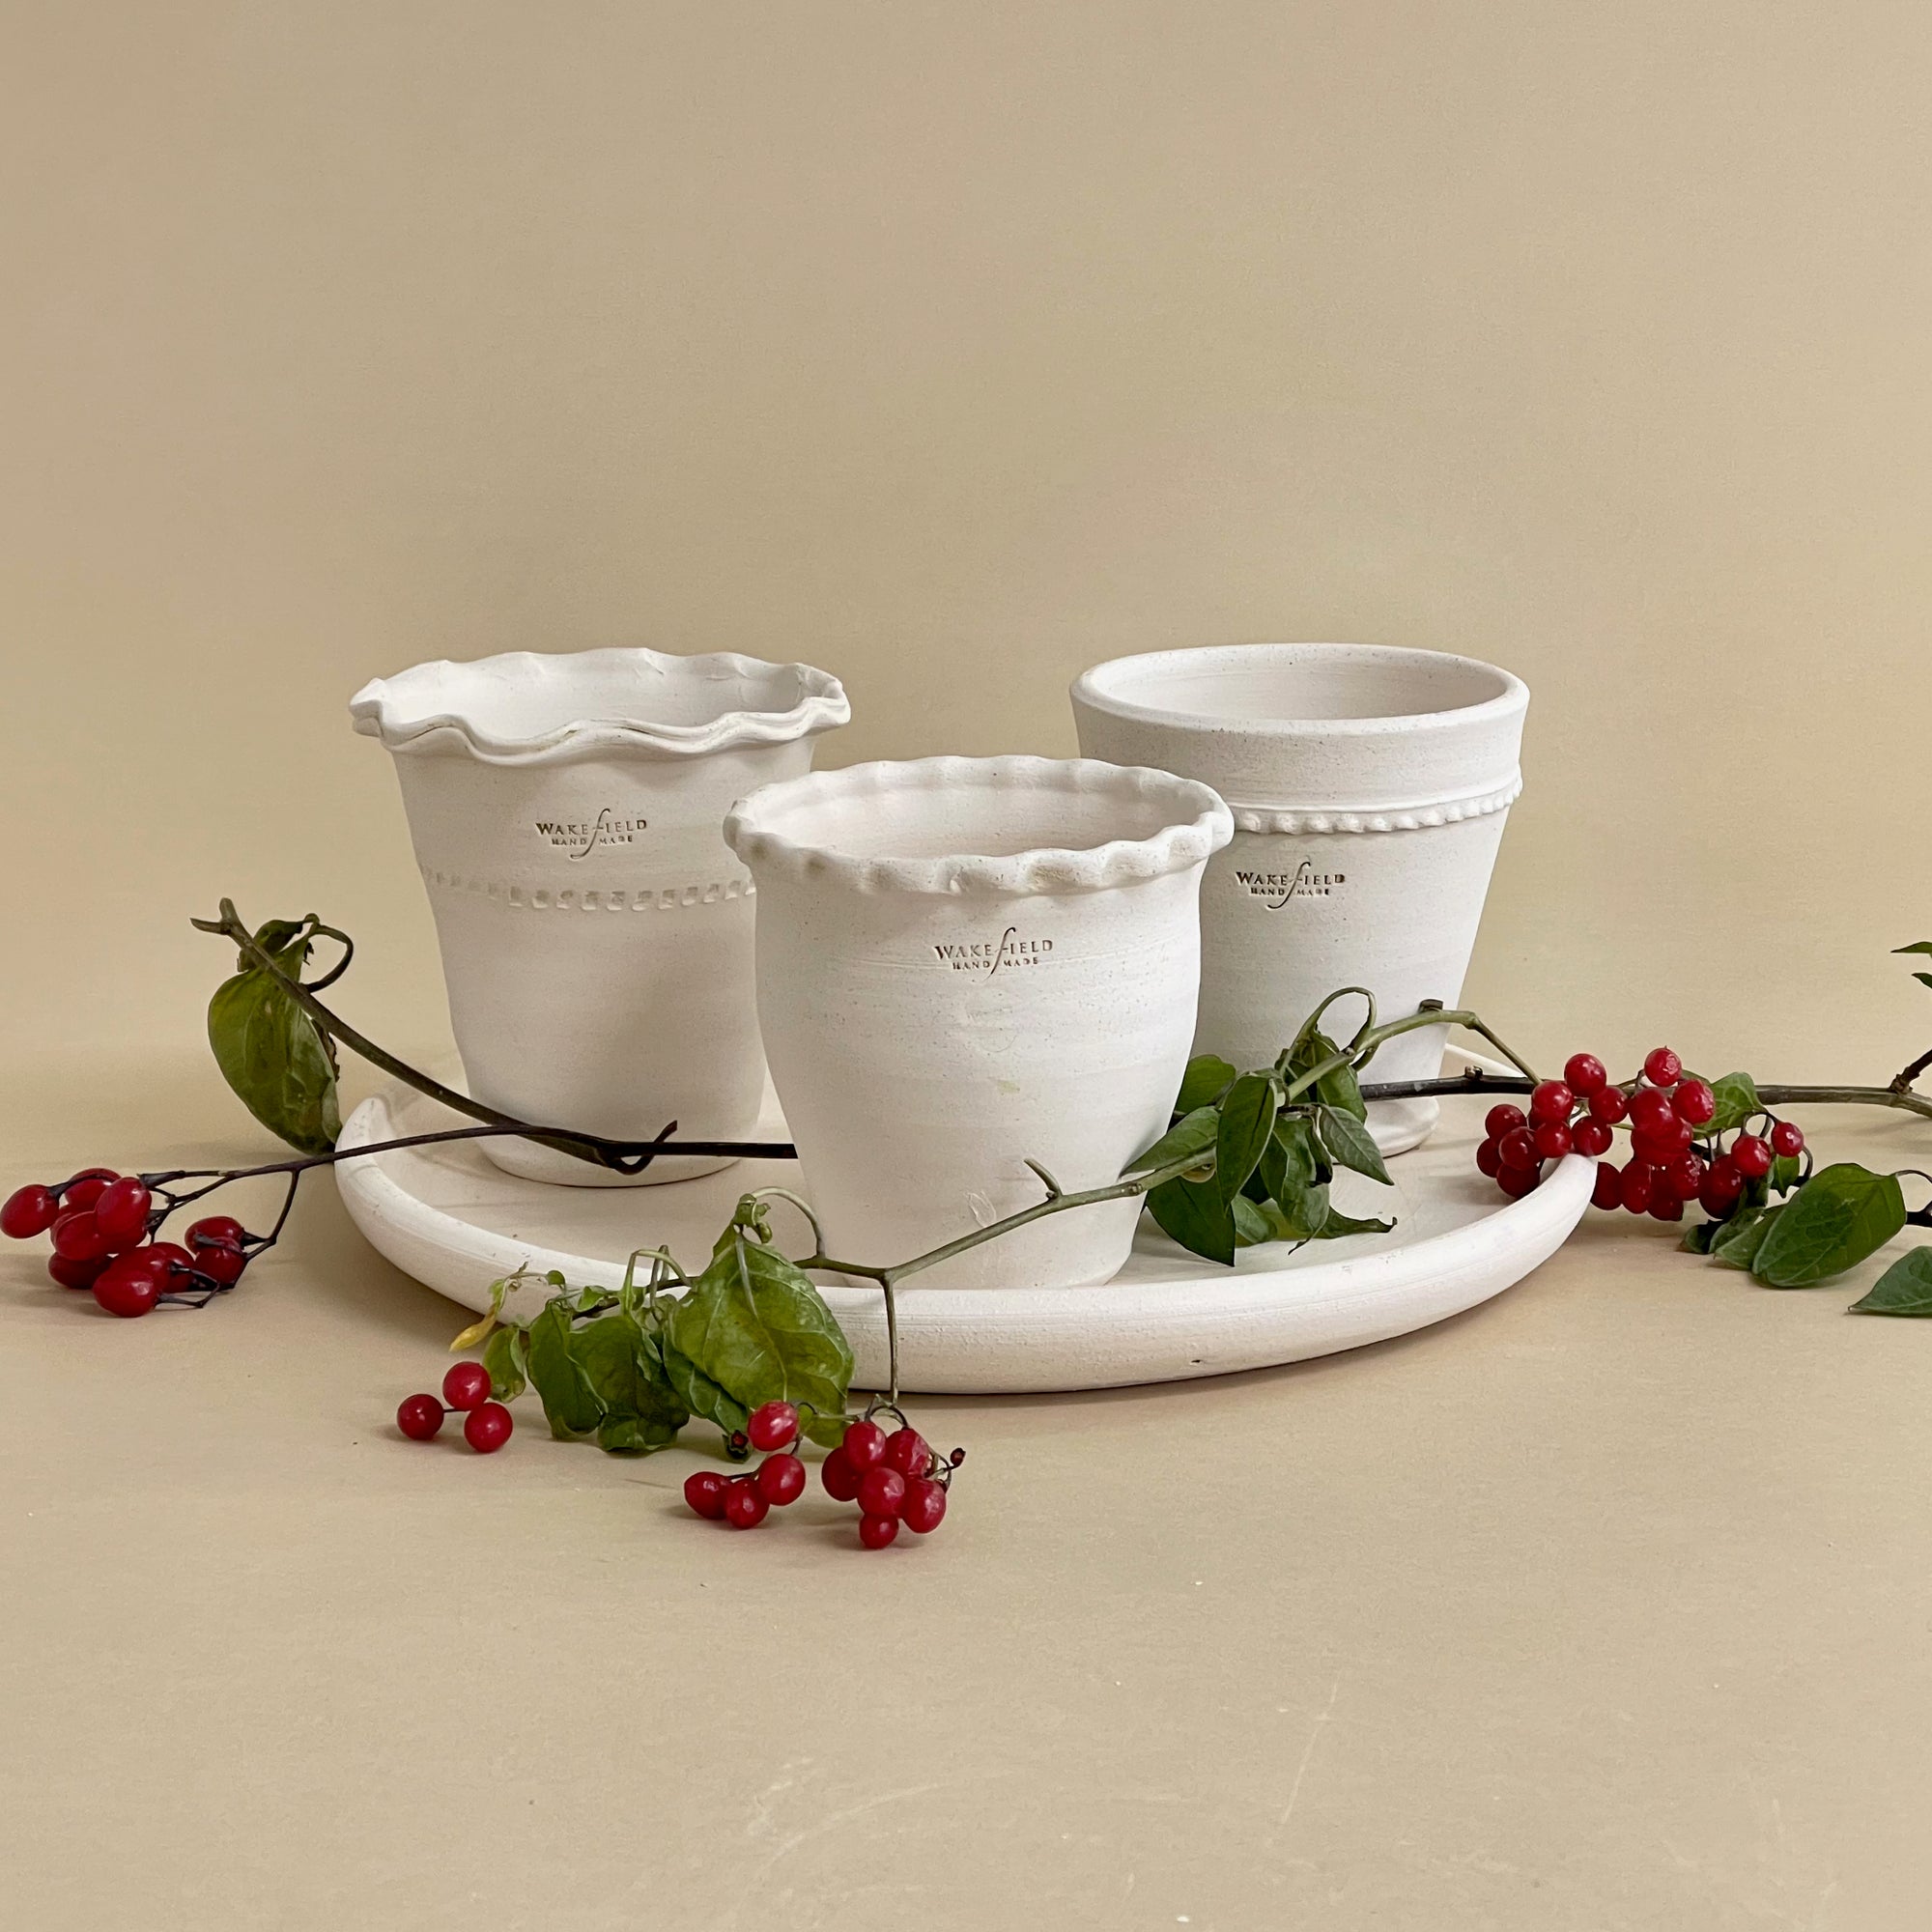 Ornamented Rim Miniature Pots, Set of 3 with Saucer